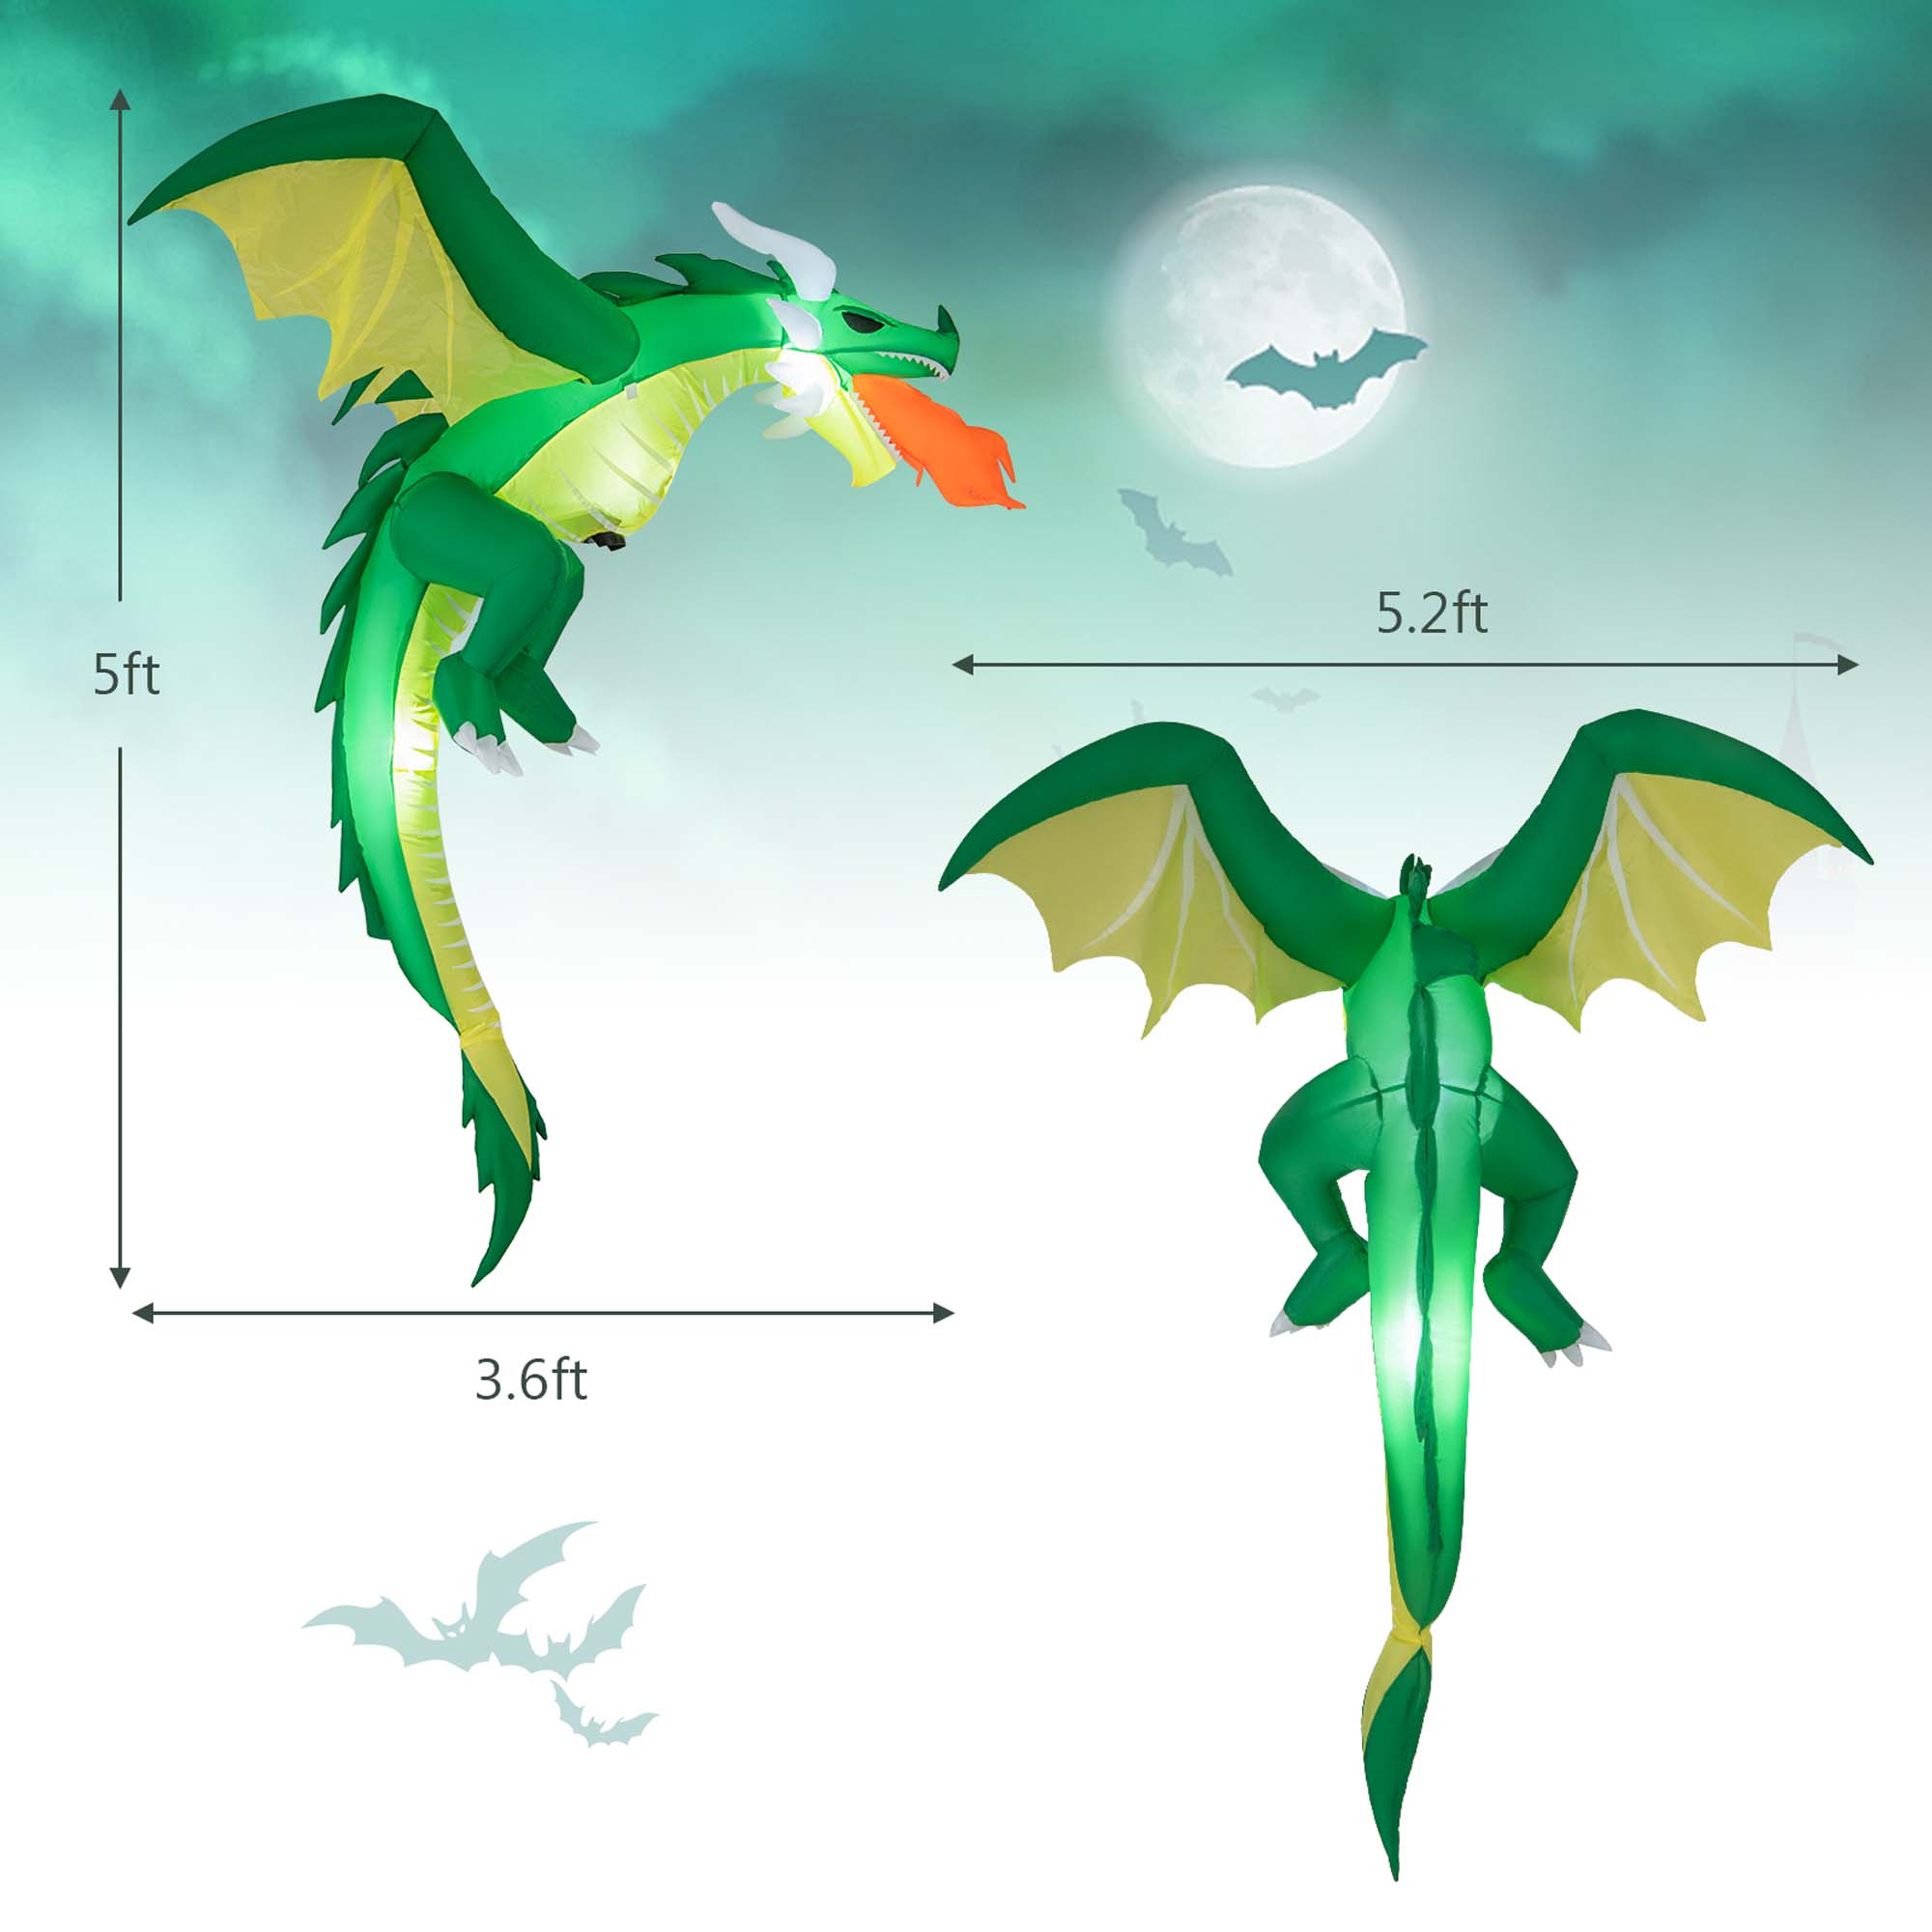 Costway 5 FT Hanging Halloween Inflatable Fire-breathing Dragon Flying Decoration Yard